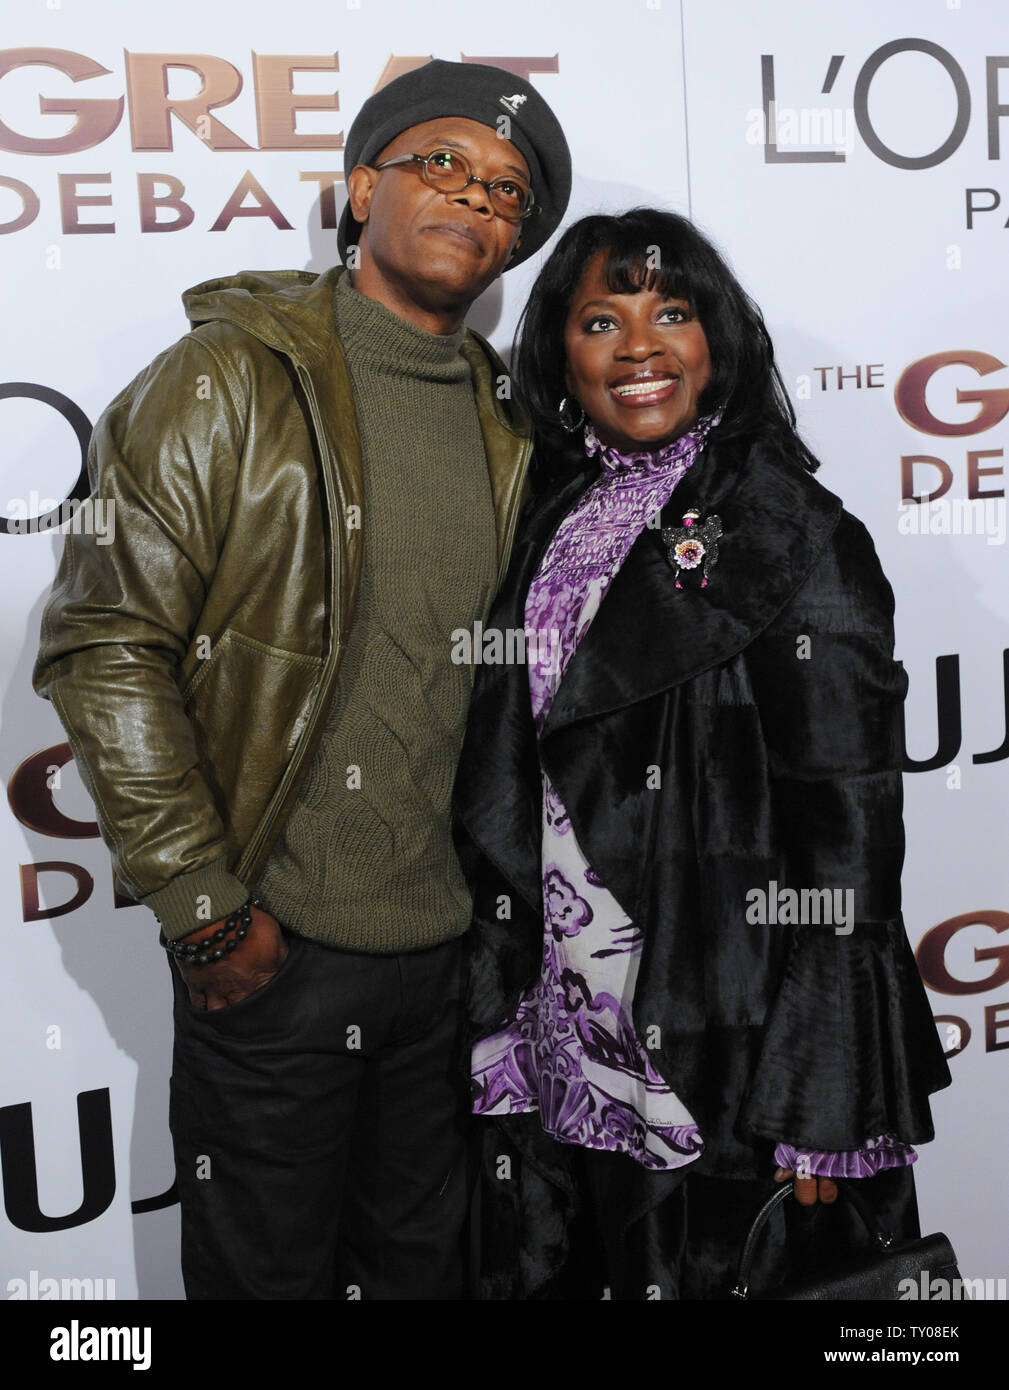 Actor Samuel L. Jackson and his wife LaTanya Richardson attend the premiere of the motion picture drama 'The Great Debaters', at the Arclight Cinerama Dome in the Hollywood section of Los Angeles on December 11, 2007. The movie is based on the true story of Melvin B. Tolson and opens in the U.S. on December 25.  (UPI Photo/Jim Ruymen) Stock Photo